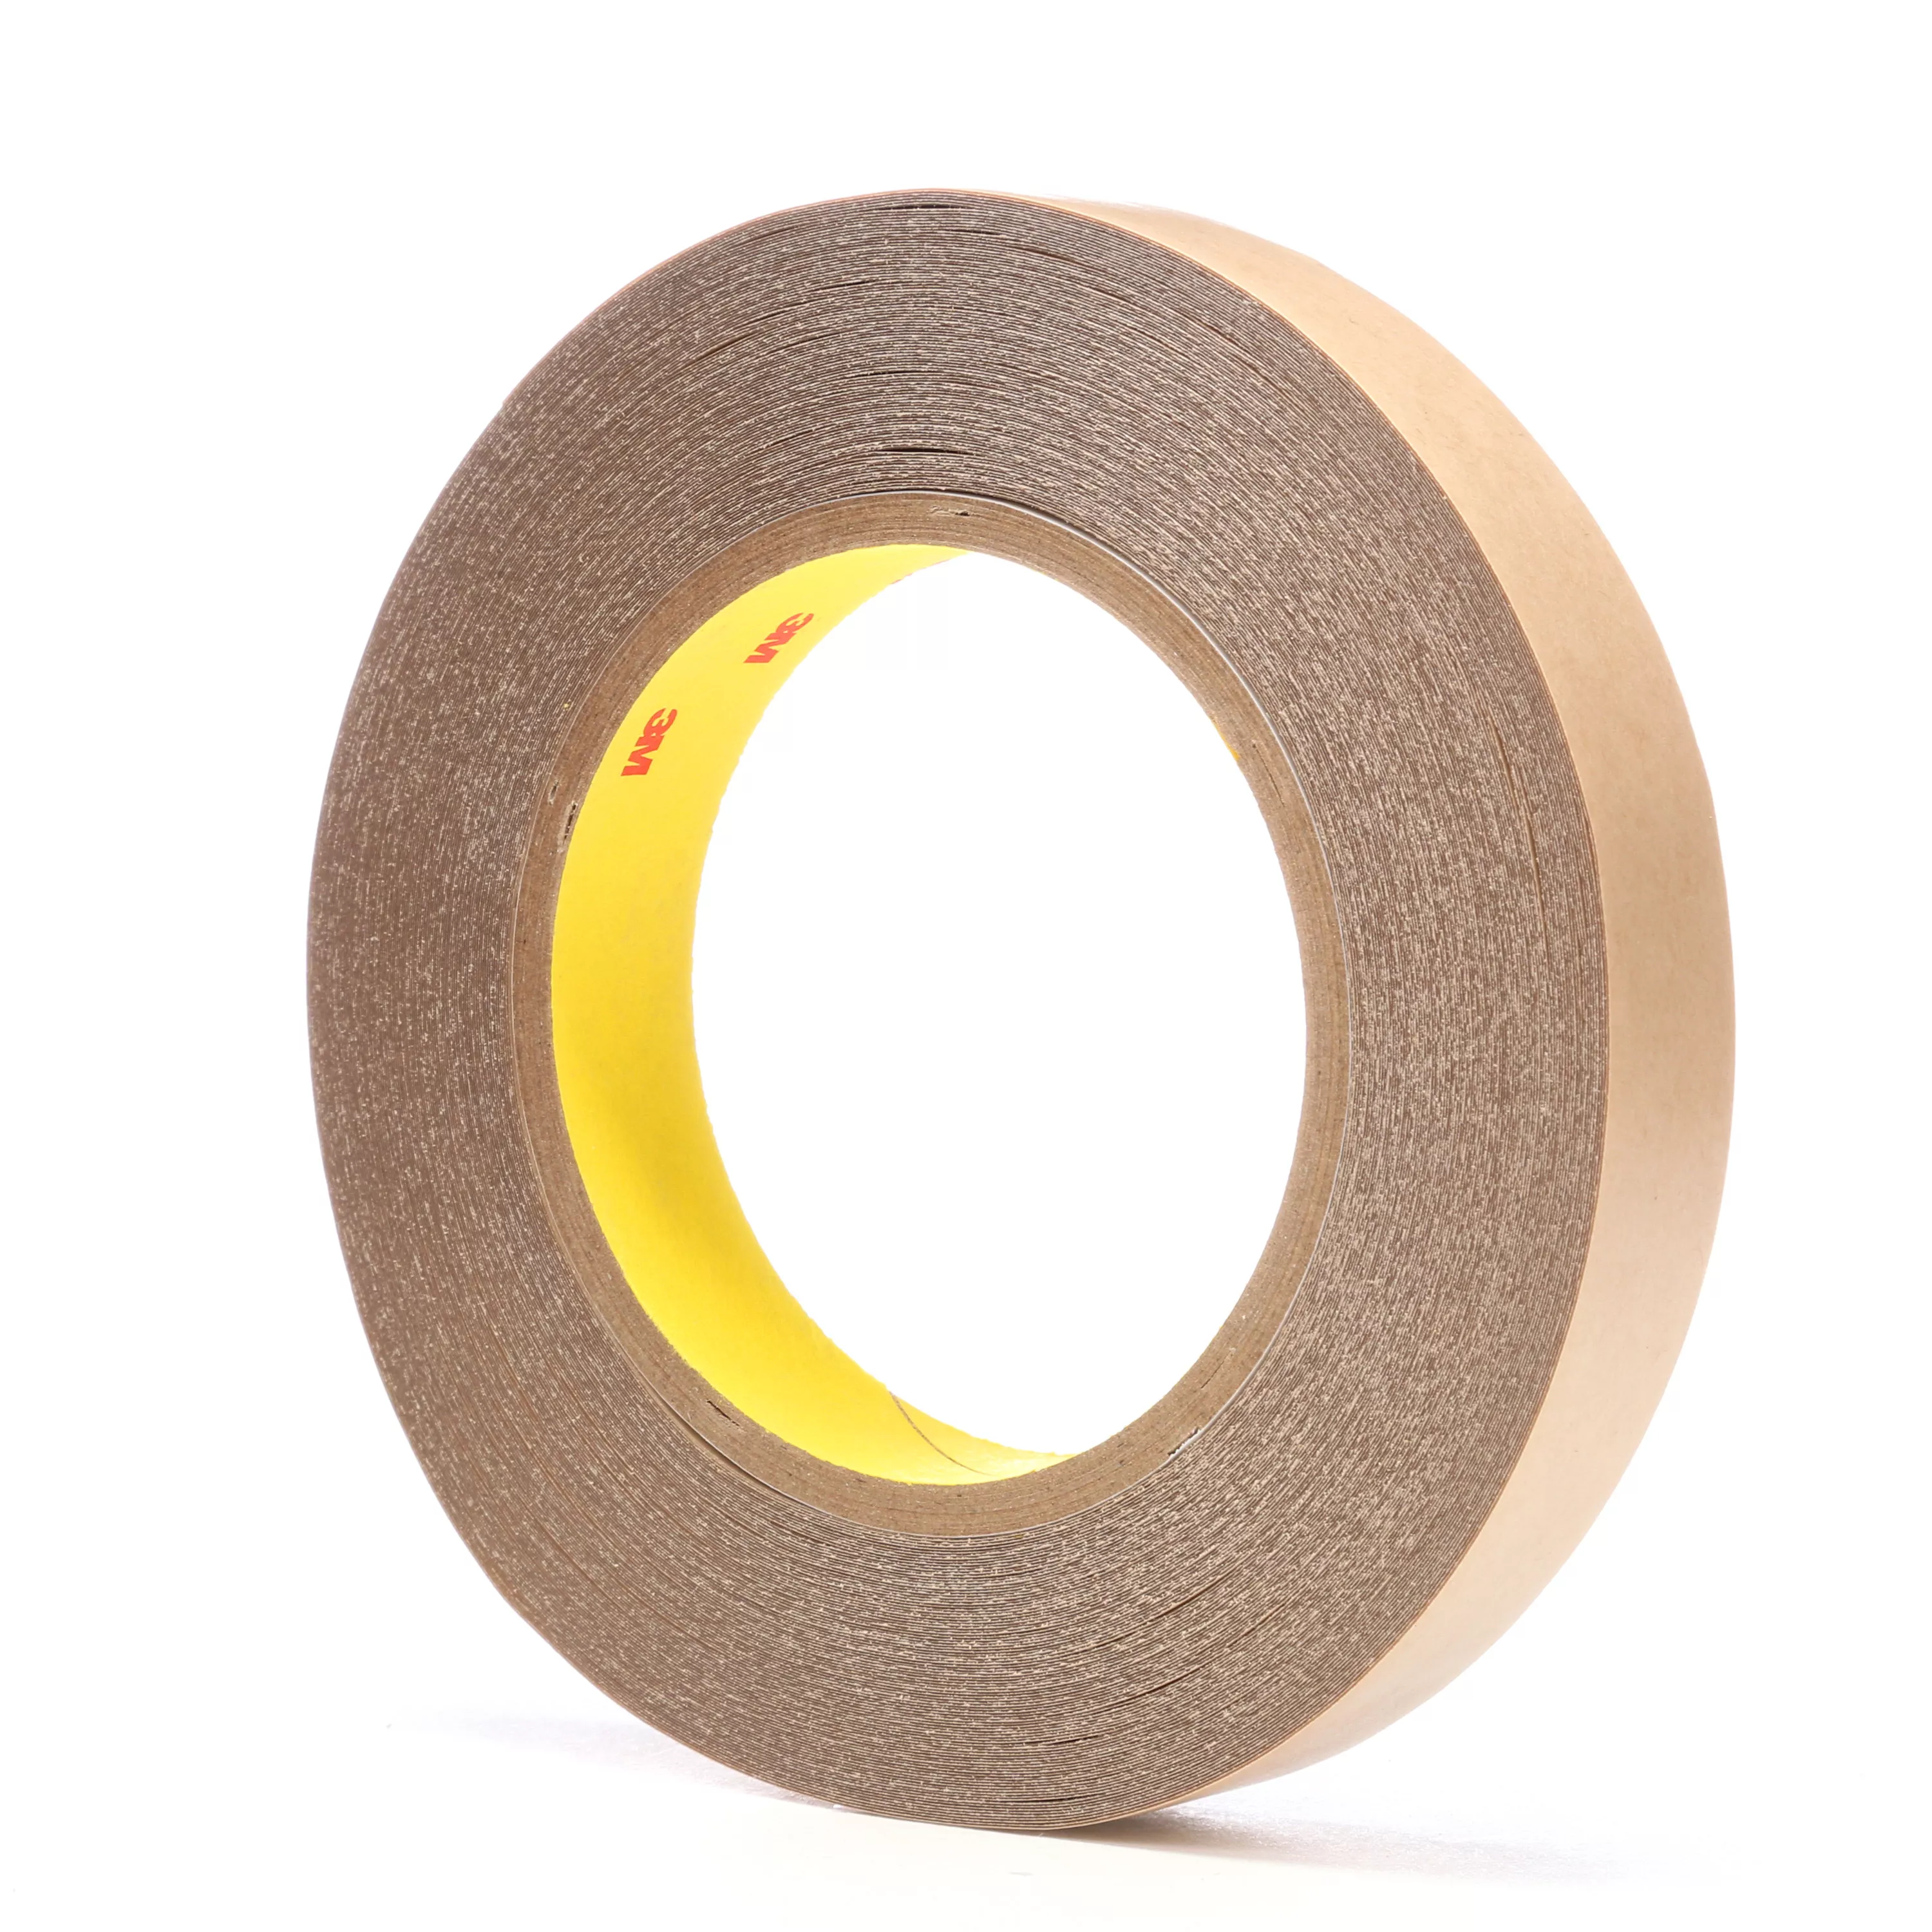 3M™ Double Coated Tape 9500PC, Clear, 3/4 in x 36 yd, 5.6 mil, 48
Roll/Case